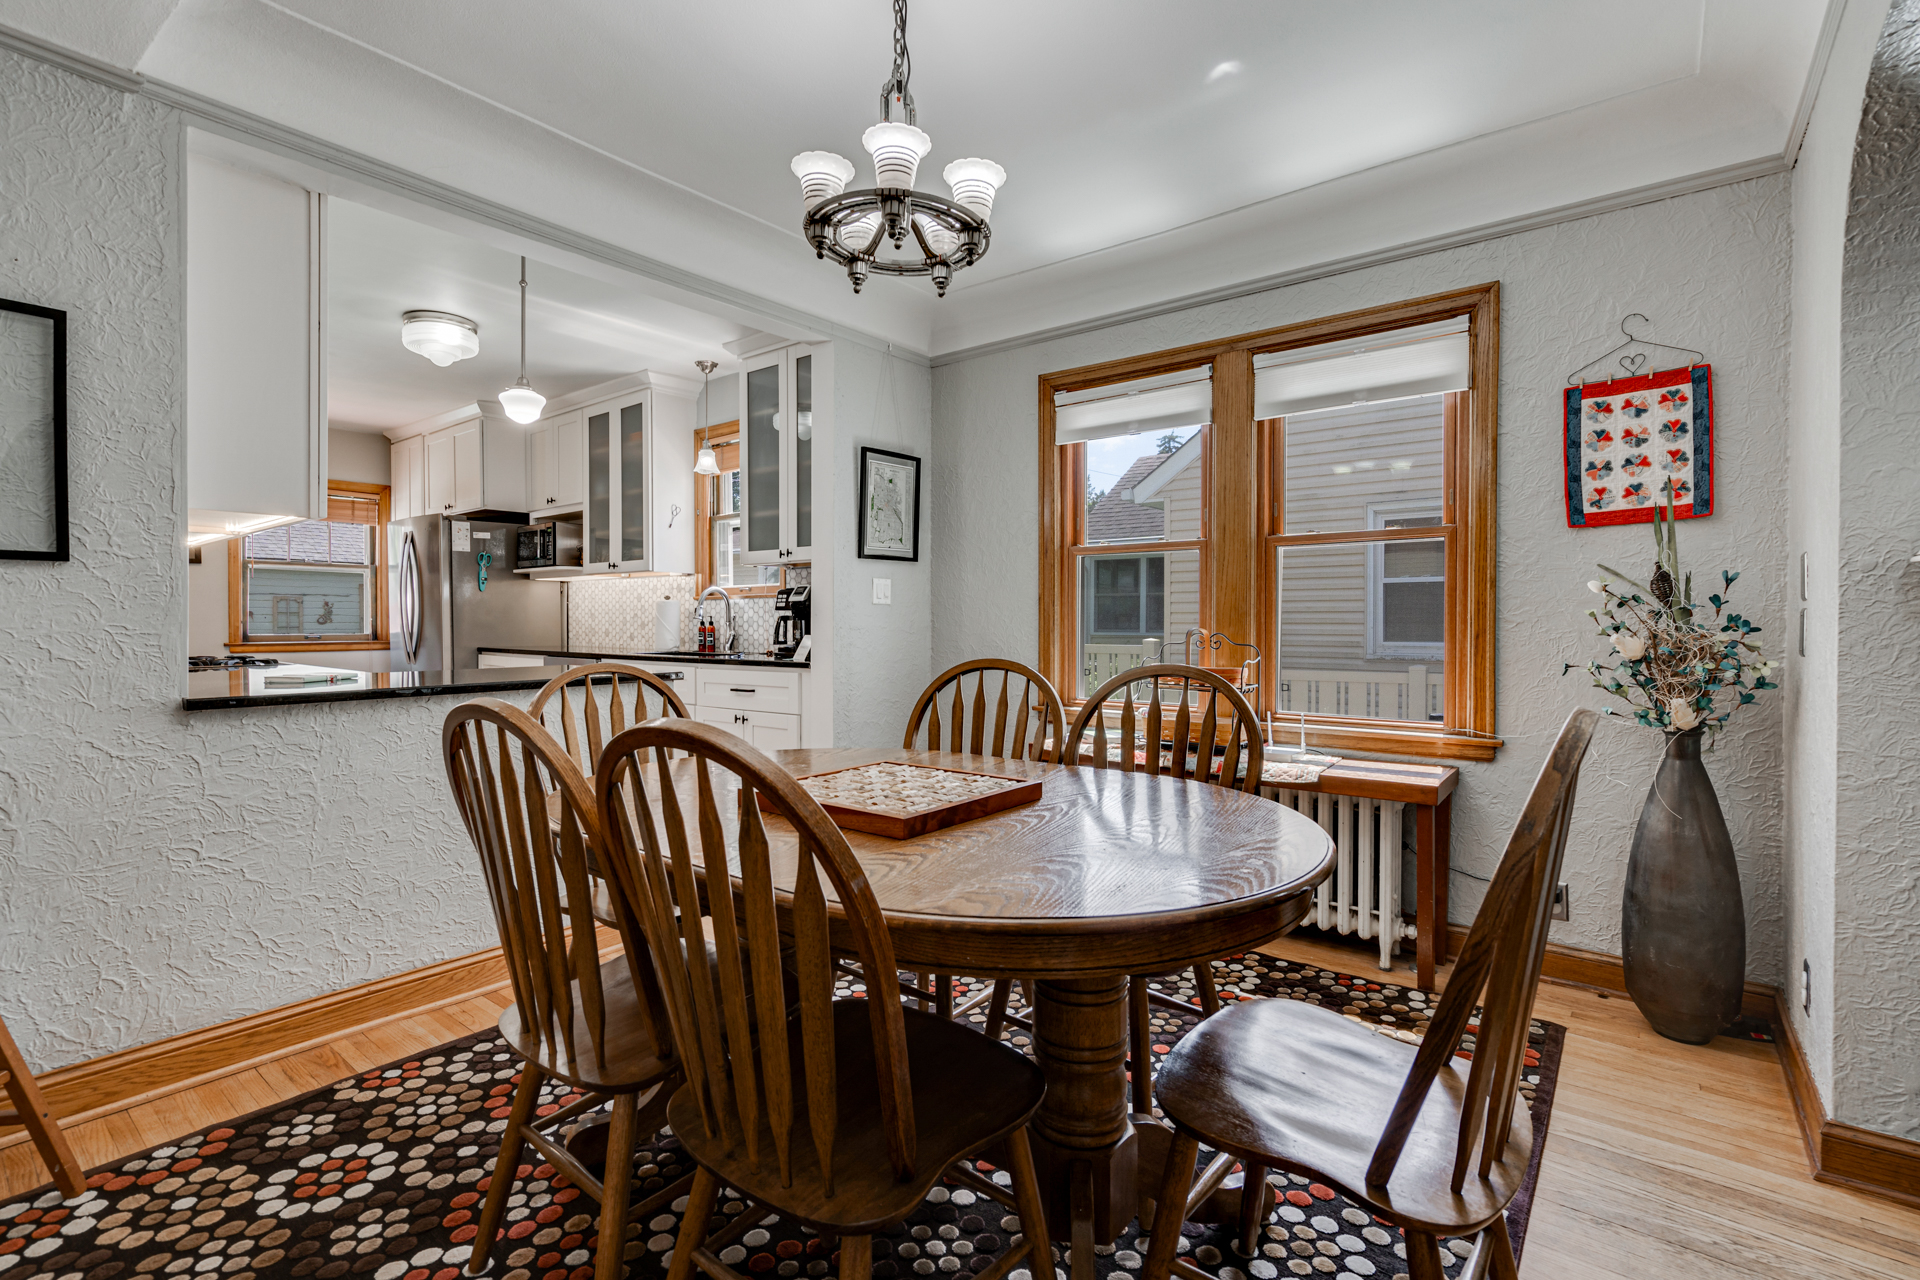 The dining room is right off the kitchen and comfortably seats six.